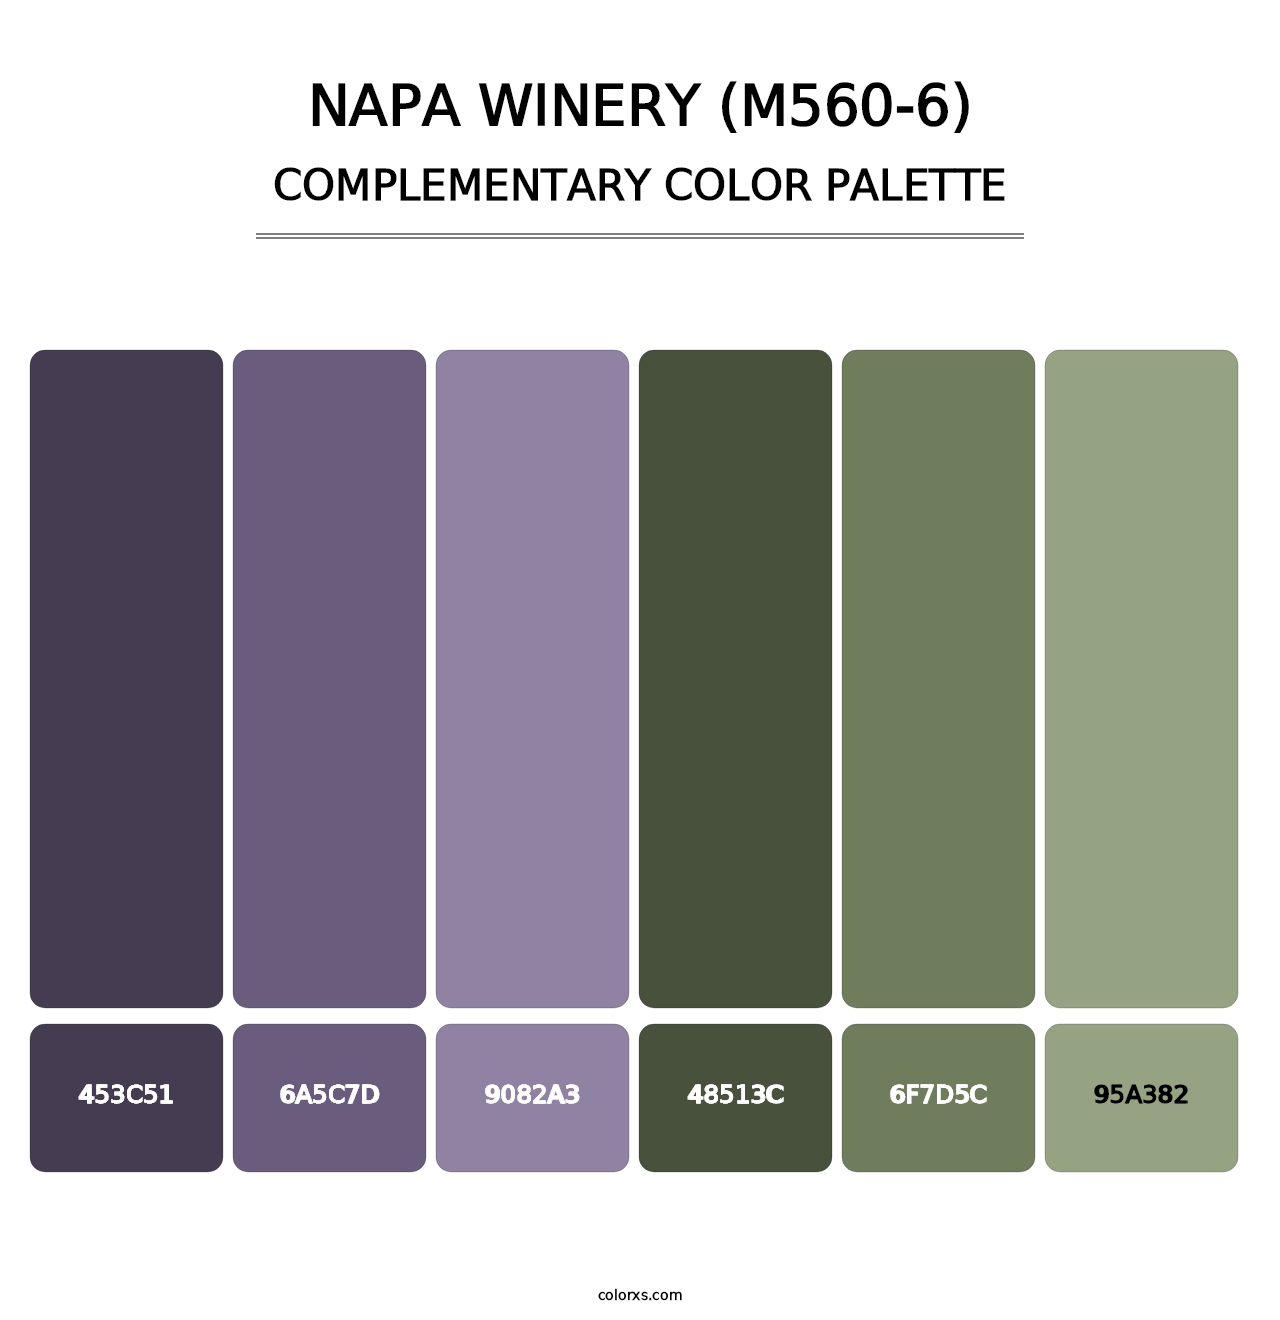 Napa Winery (M560-6) - Complementary Color Palette